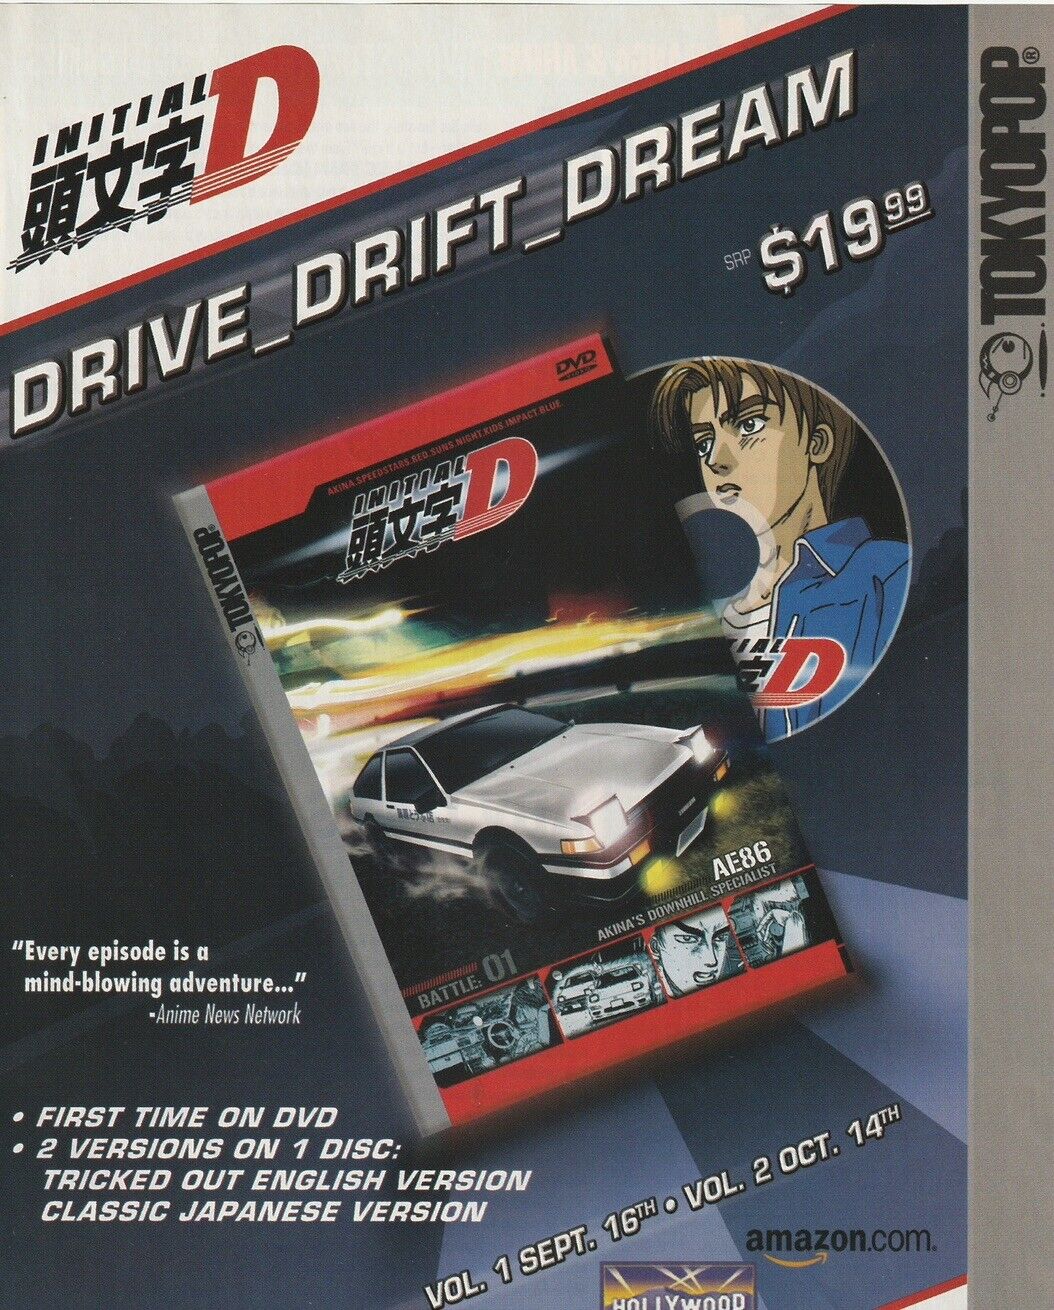 2003 Initial D Japanese Anime DVD *DEBUT* Print Ad/Poster 20x27cm WIZ144